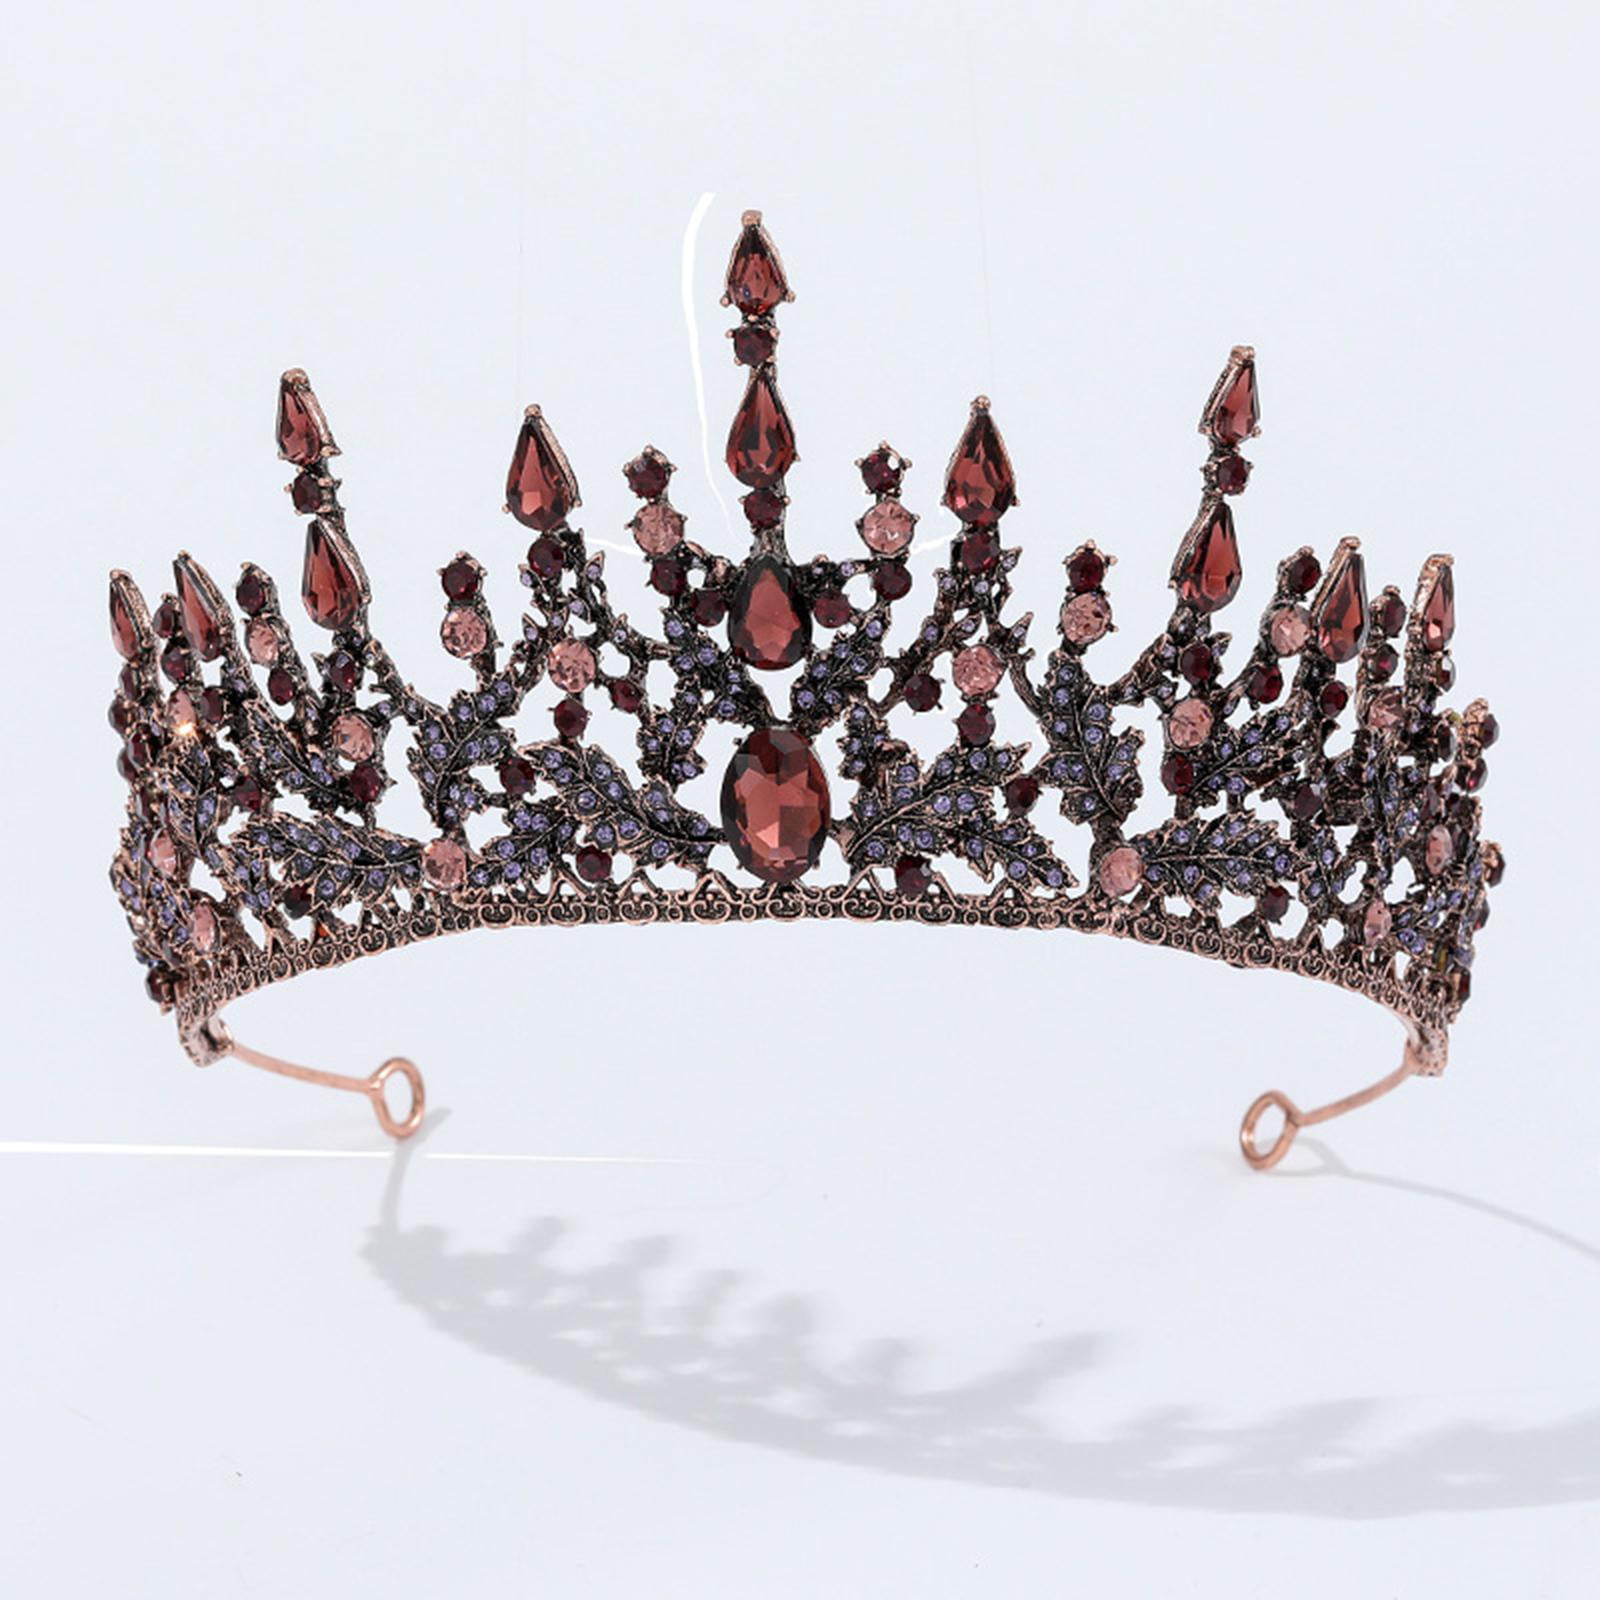 8cm High Large Heart Crystal Tiara Crown Wedding Prom Party Pageant 3 Colors 